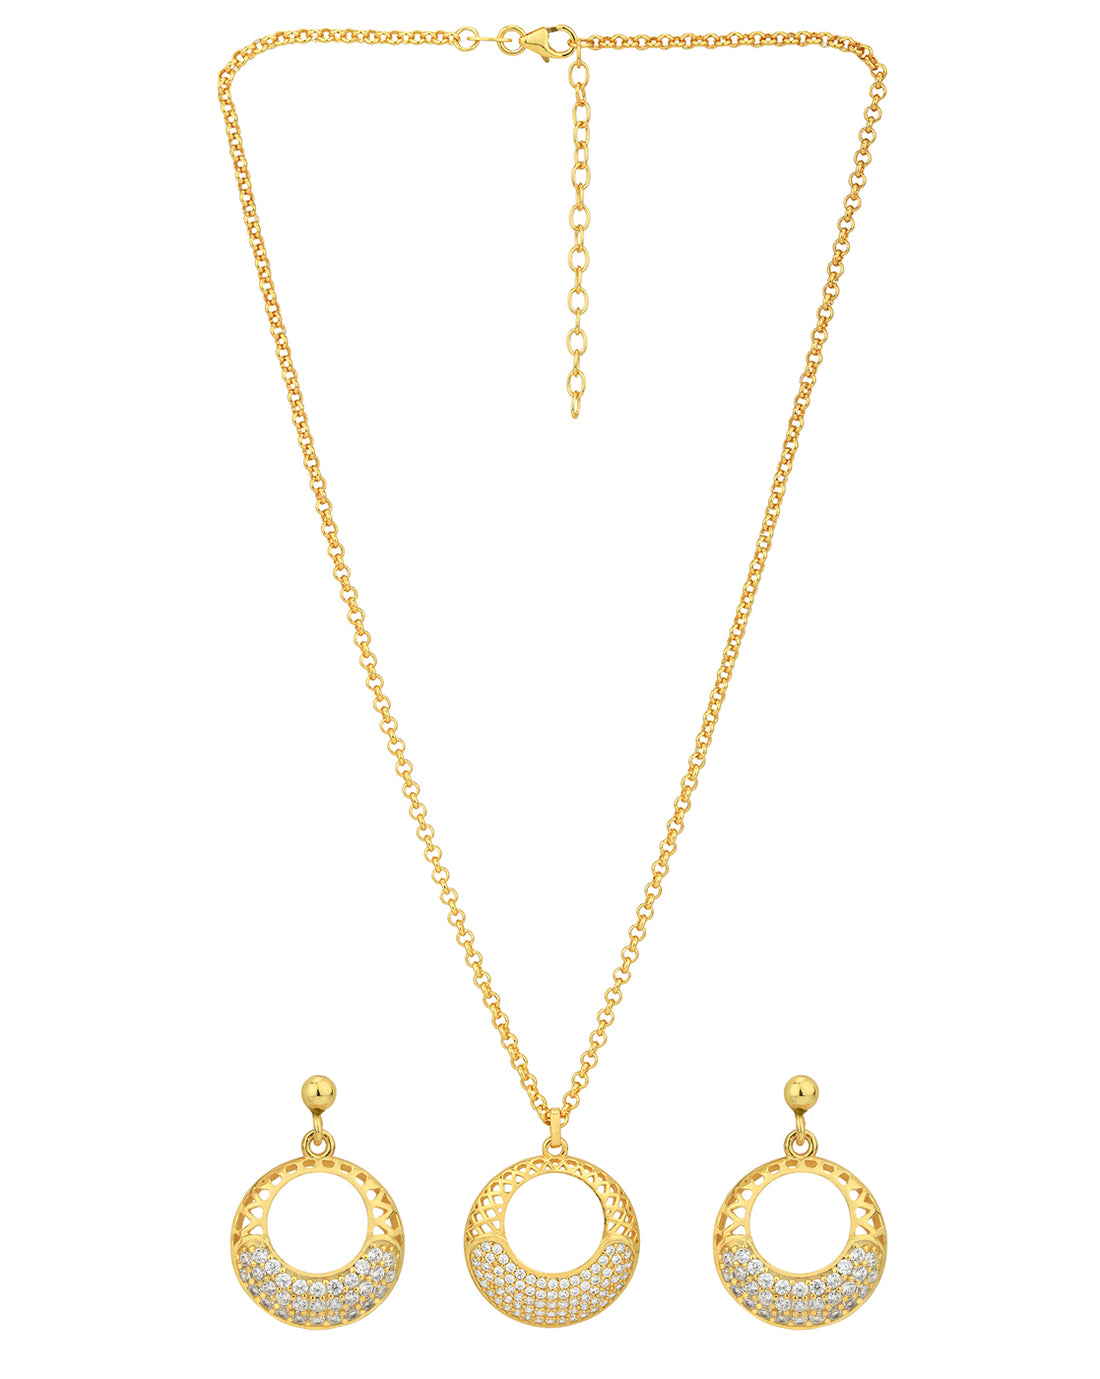 18kt Gold Plated with CZ Filigree Circular Necklace and Earring set for women